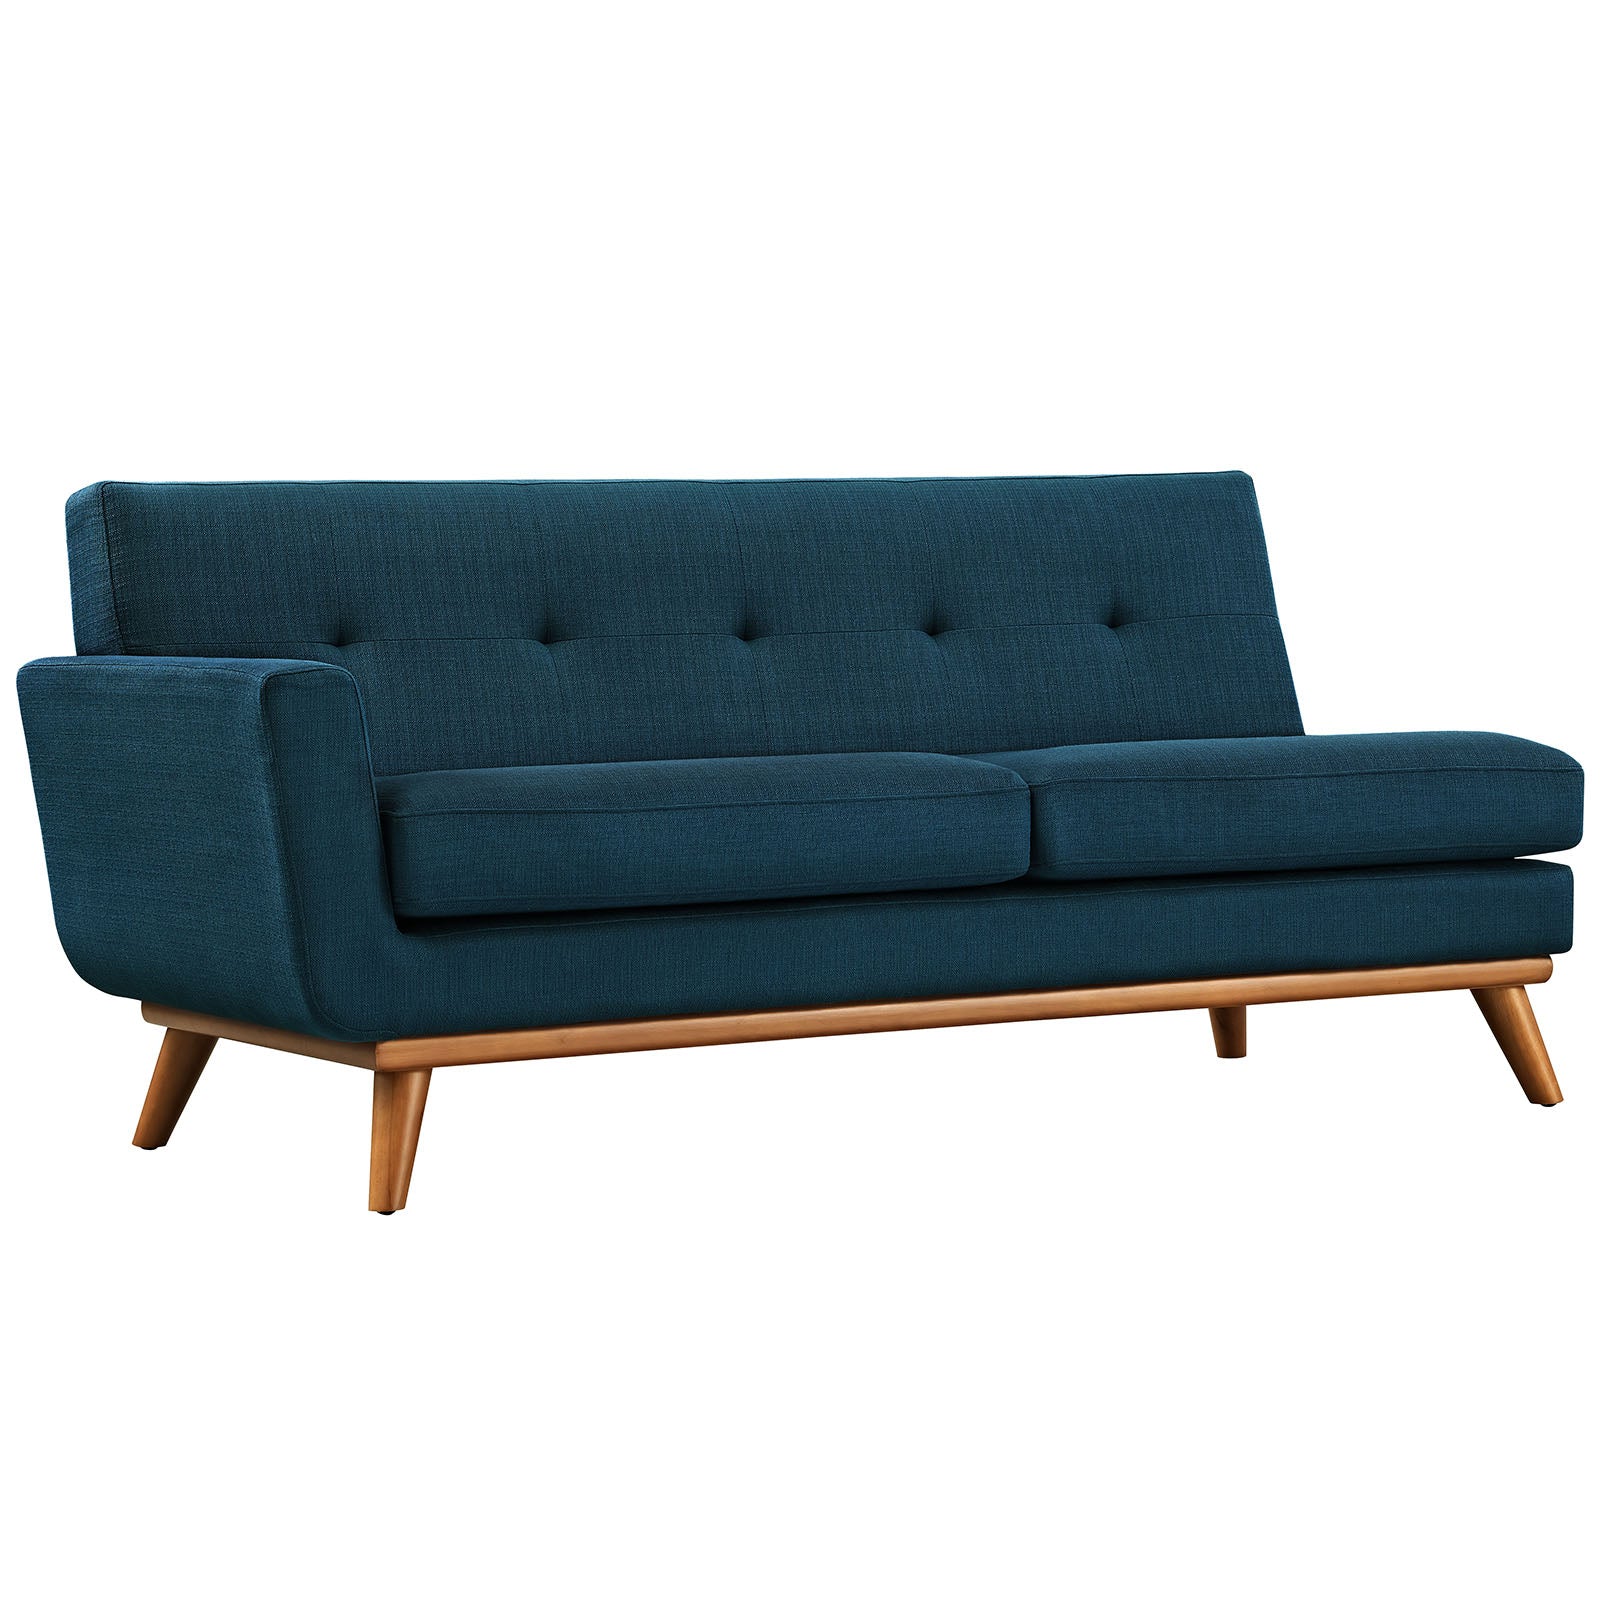 Modway Sectional Sofas - Engage L-Shaped Sectional Sofa Azure